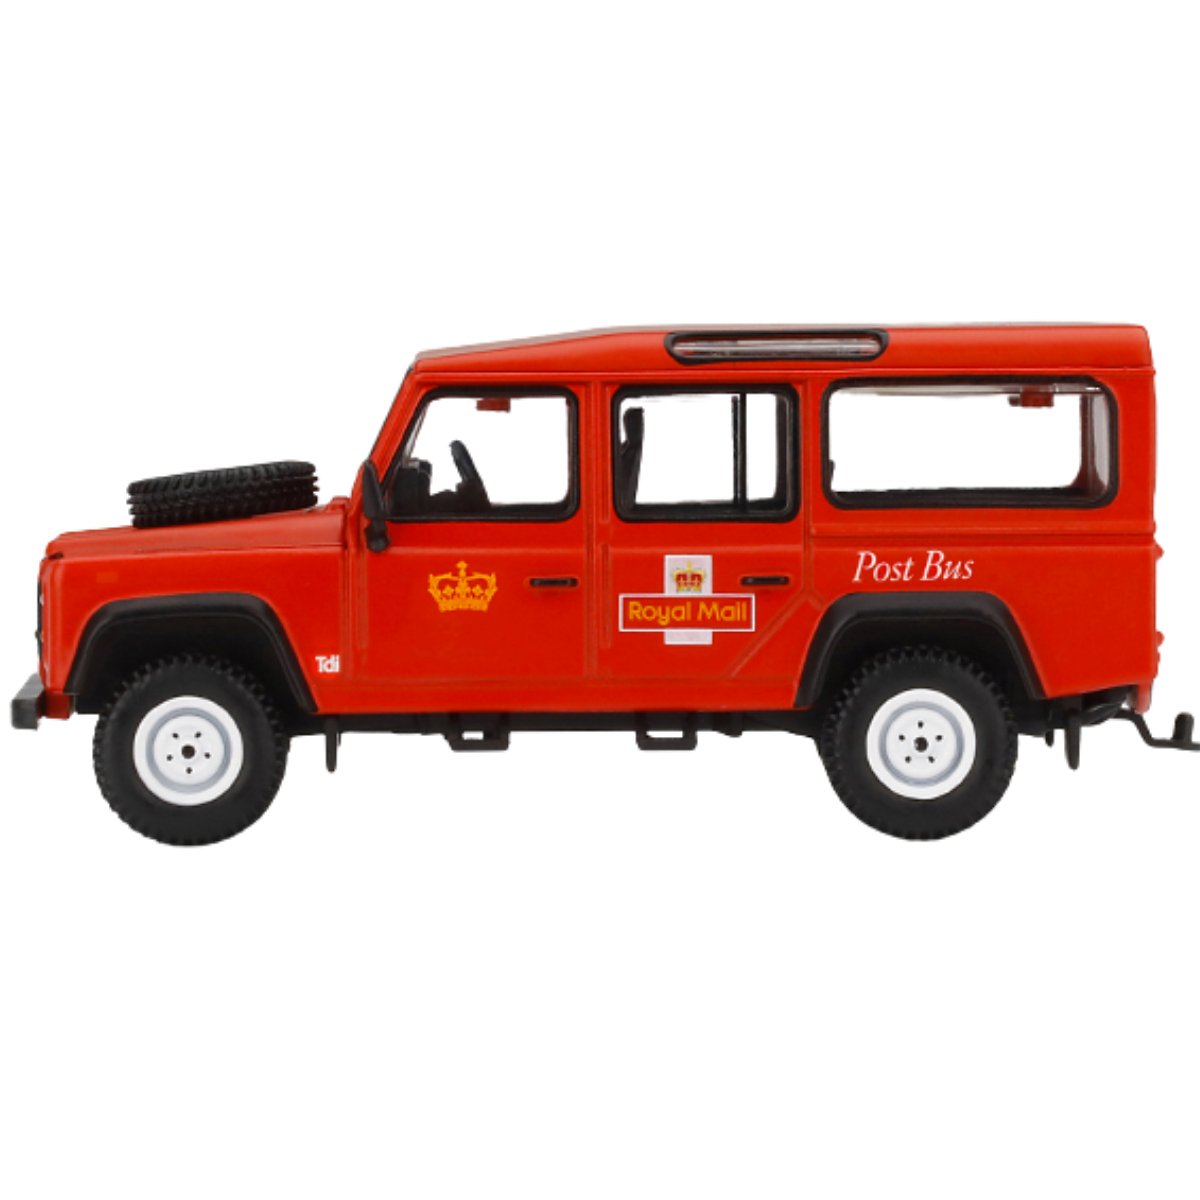 Mini GT Land Rover Defender 110 UK Royal Mail Post Bus (1:64 Scale)